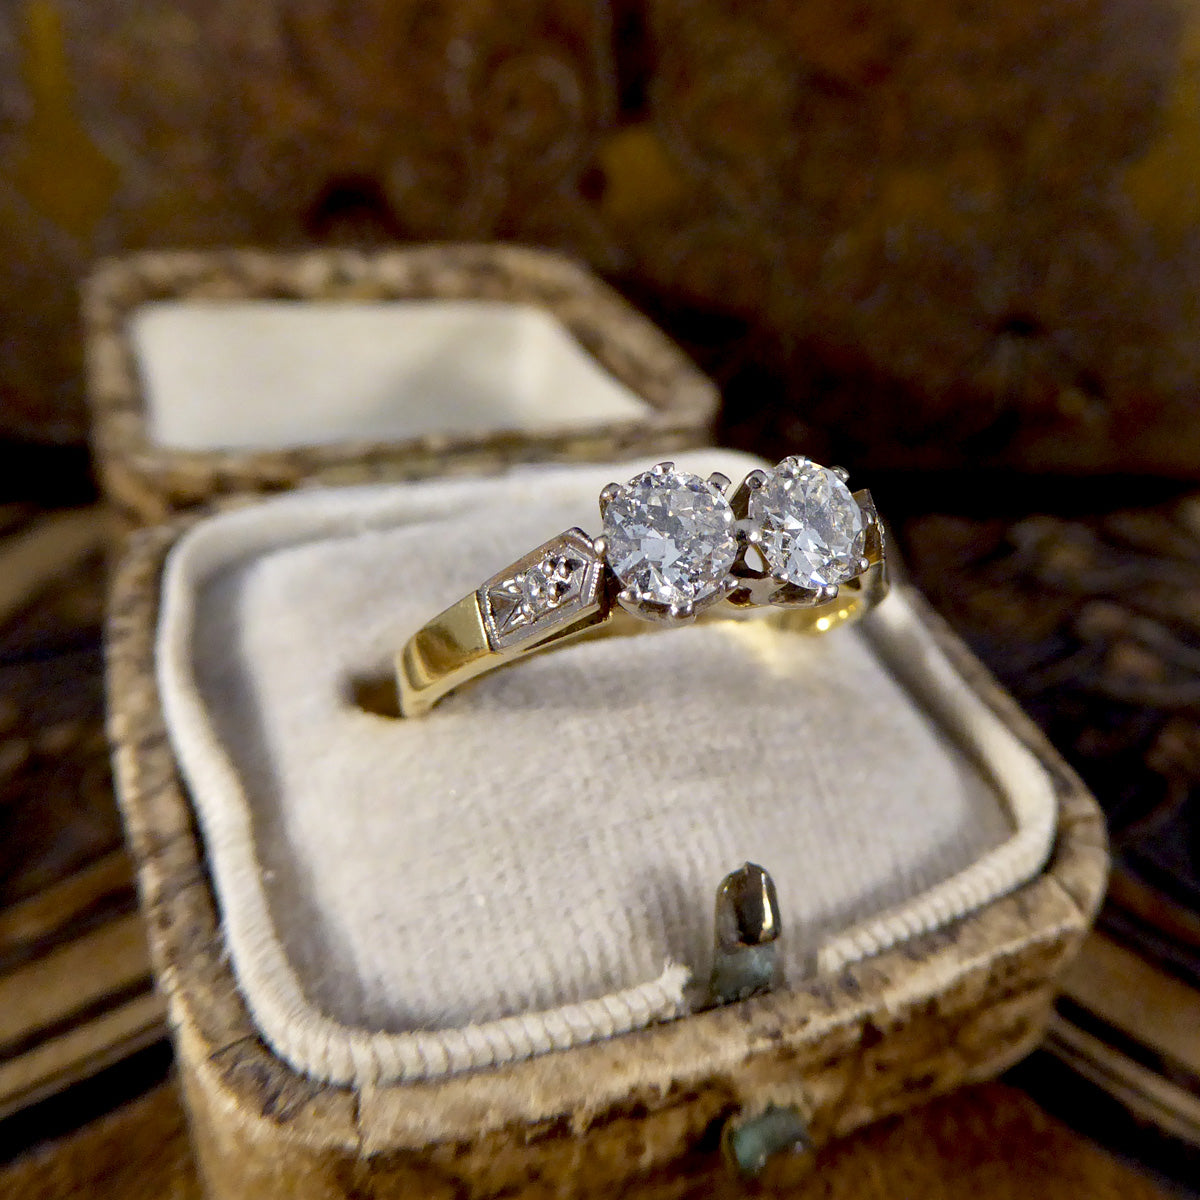 Vintage and Unusual Old Cut Diamond Two Stone Ring in 18ct Gold